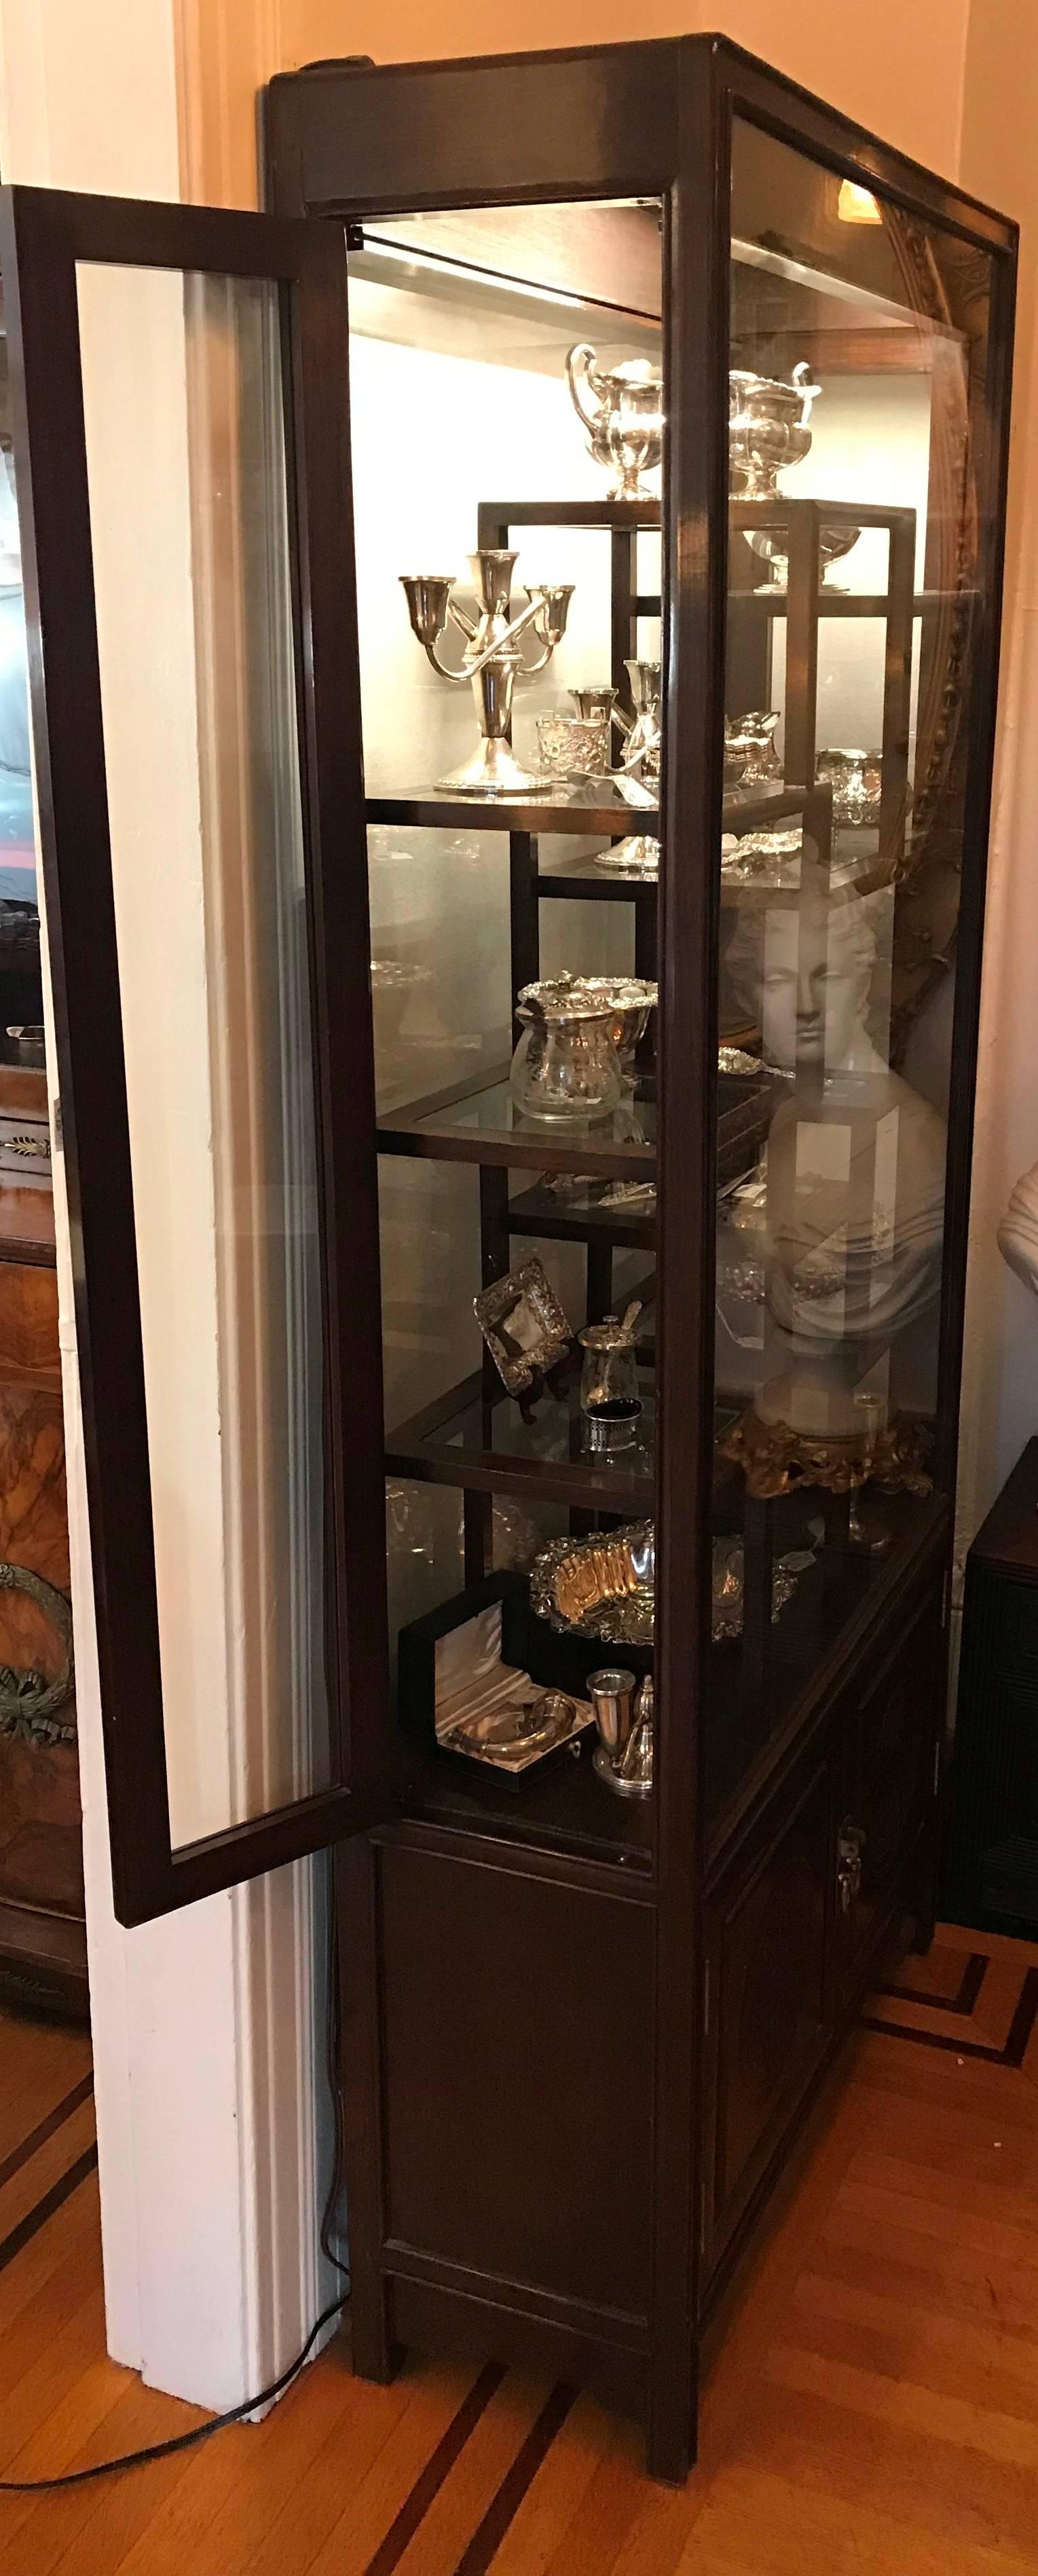 Chinese collection cabinet. Dark wood with glass front and back. Can be viewed or displayed from both sides.

Interior with 10 various size framed glass shelves. Two-door lower cabinet. Interior accessed from a single door on either side.

20th